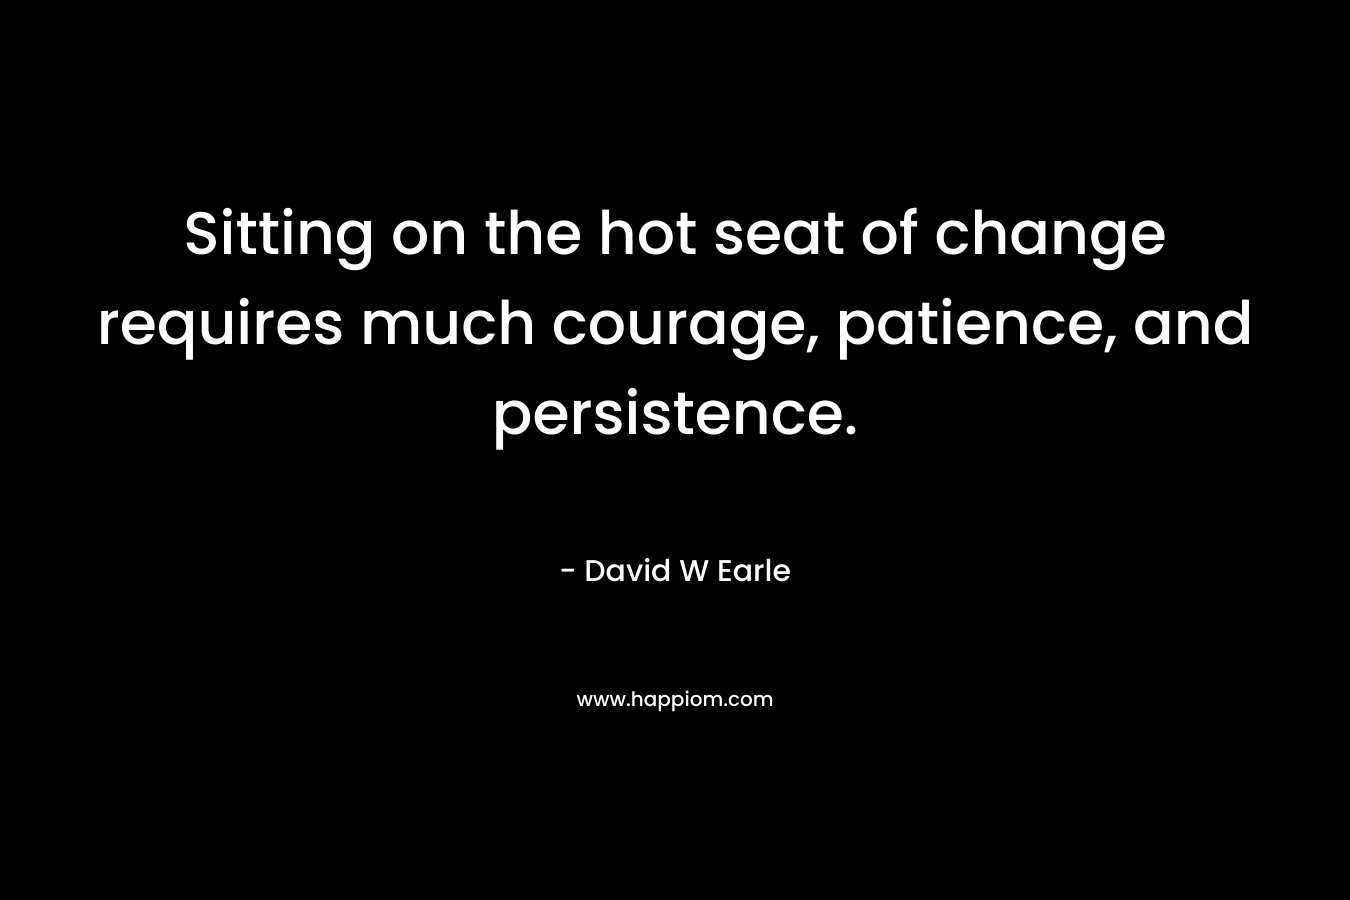 Sitting on the hot seat of change requires much courage, patience, and persistence.